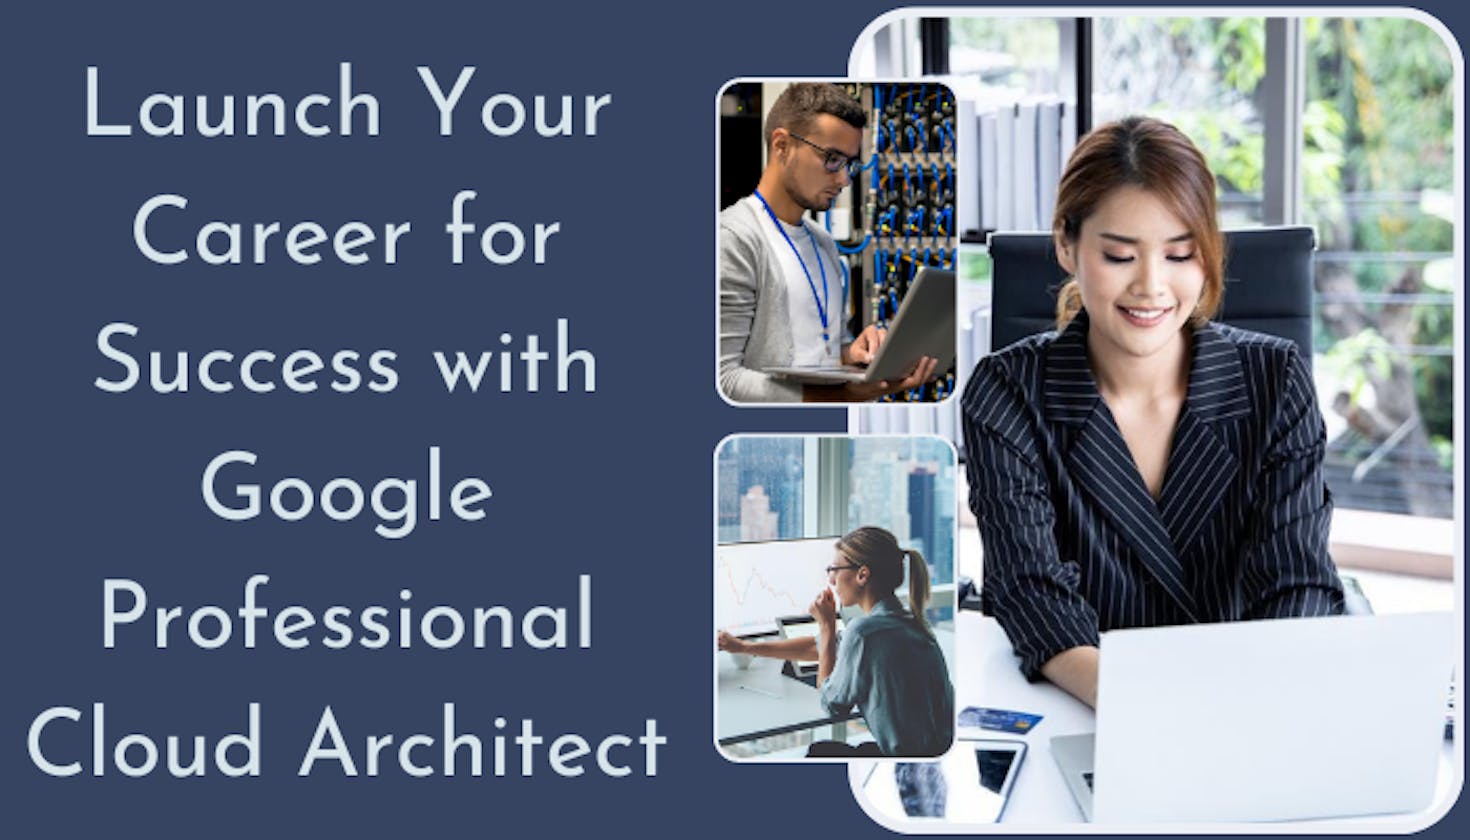 Google Professional Cloud Architect: A Vital Role for Success in the Cloud